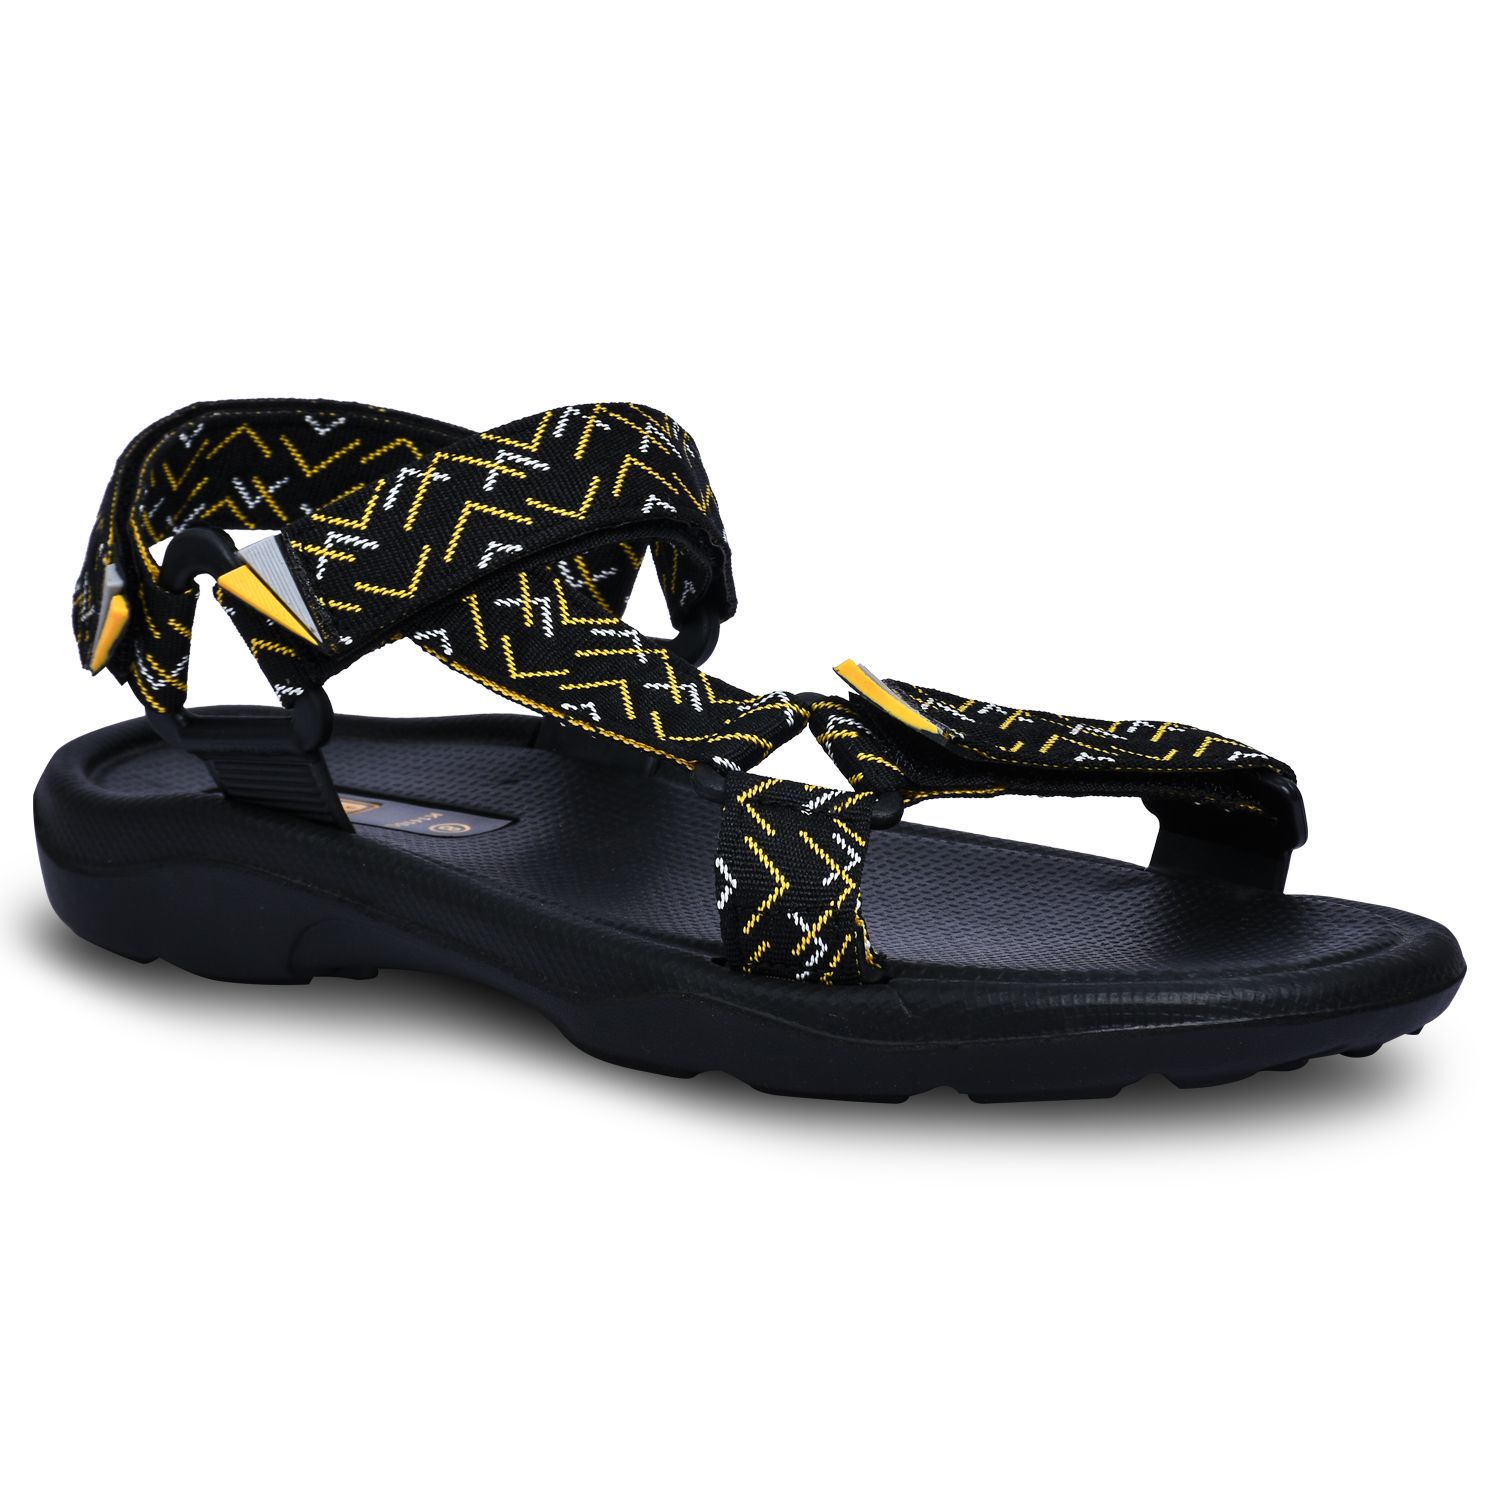     			Paragon Yellow Floater Sandals